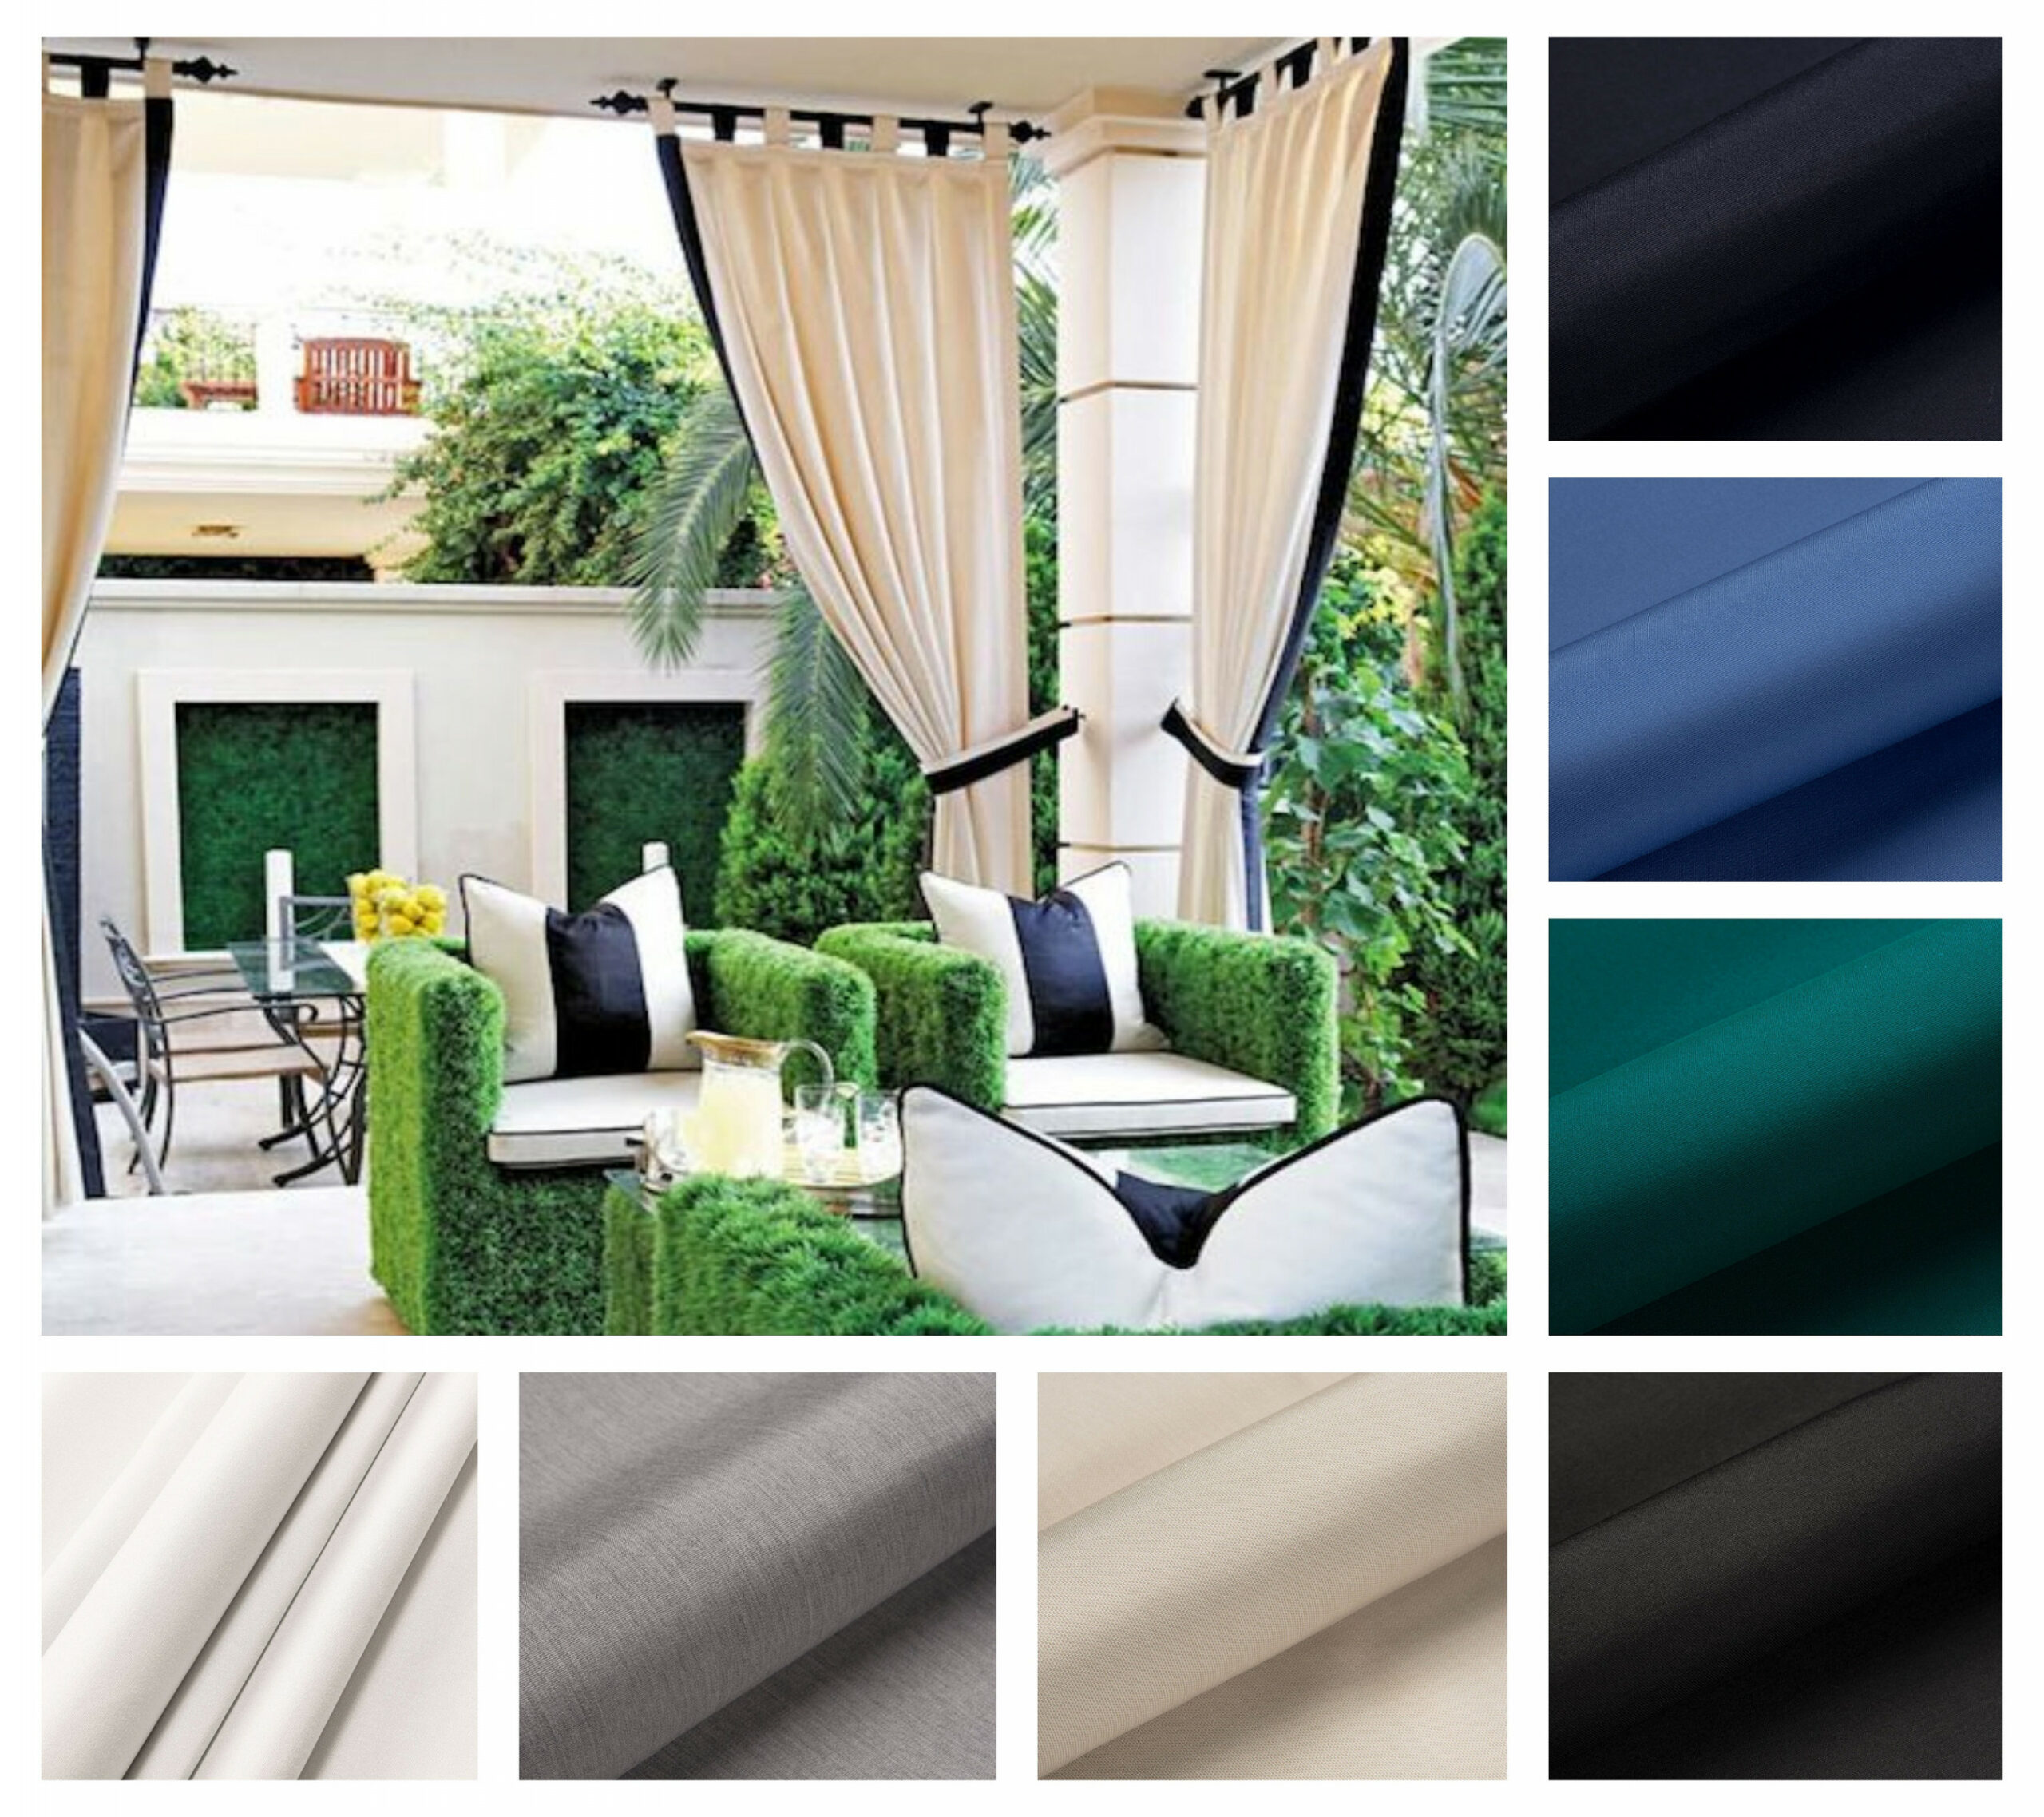 Sunbrella Custom Outdoor Drapes with band detail and Tie back